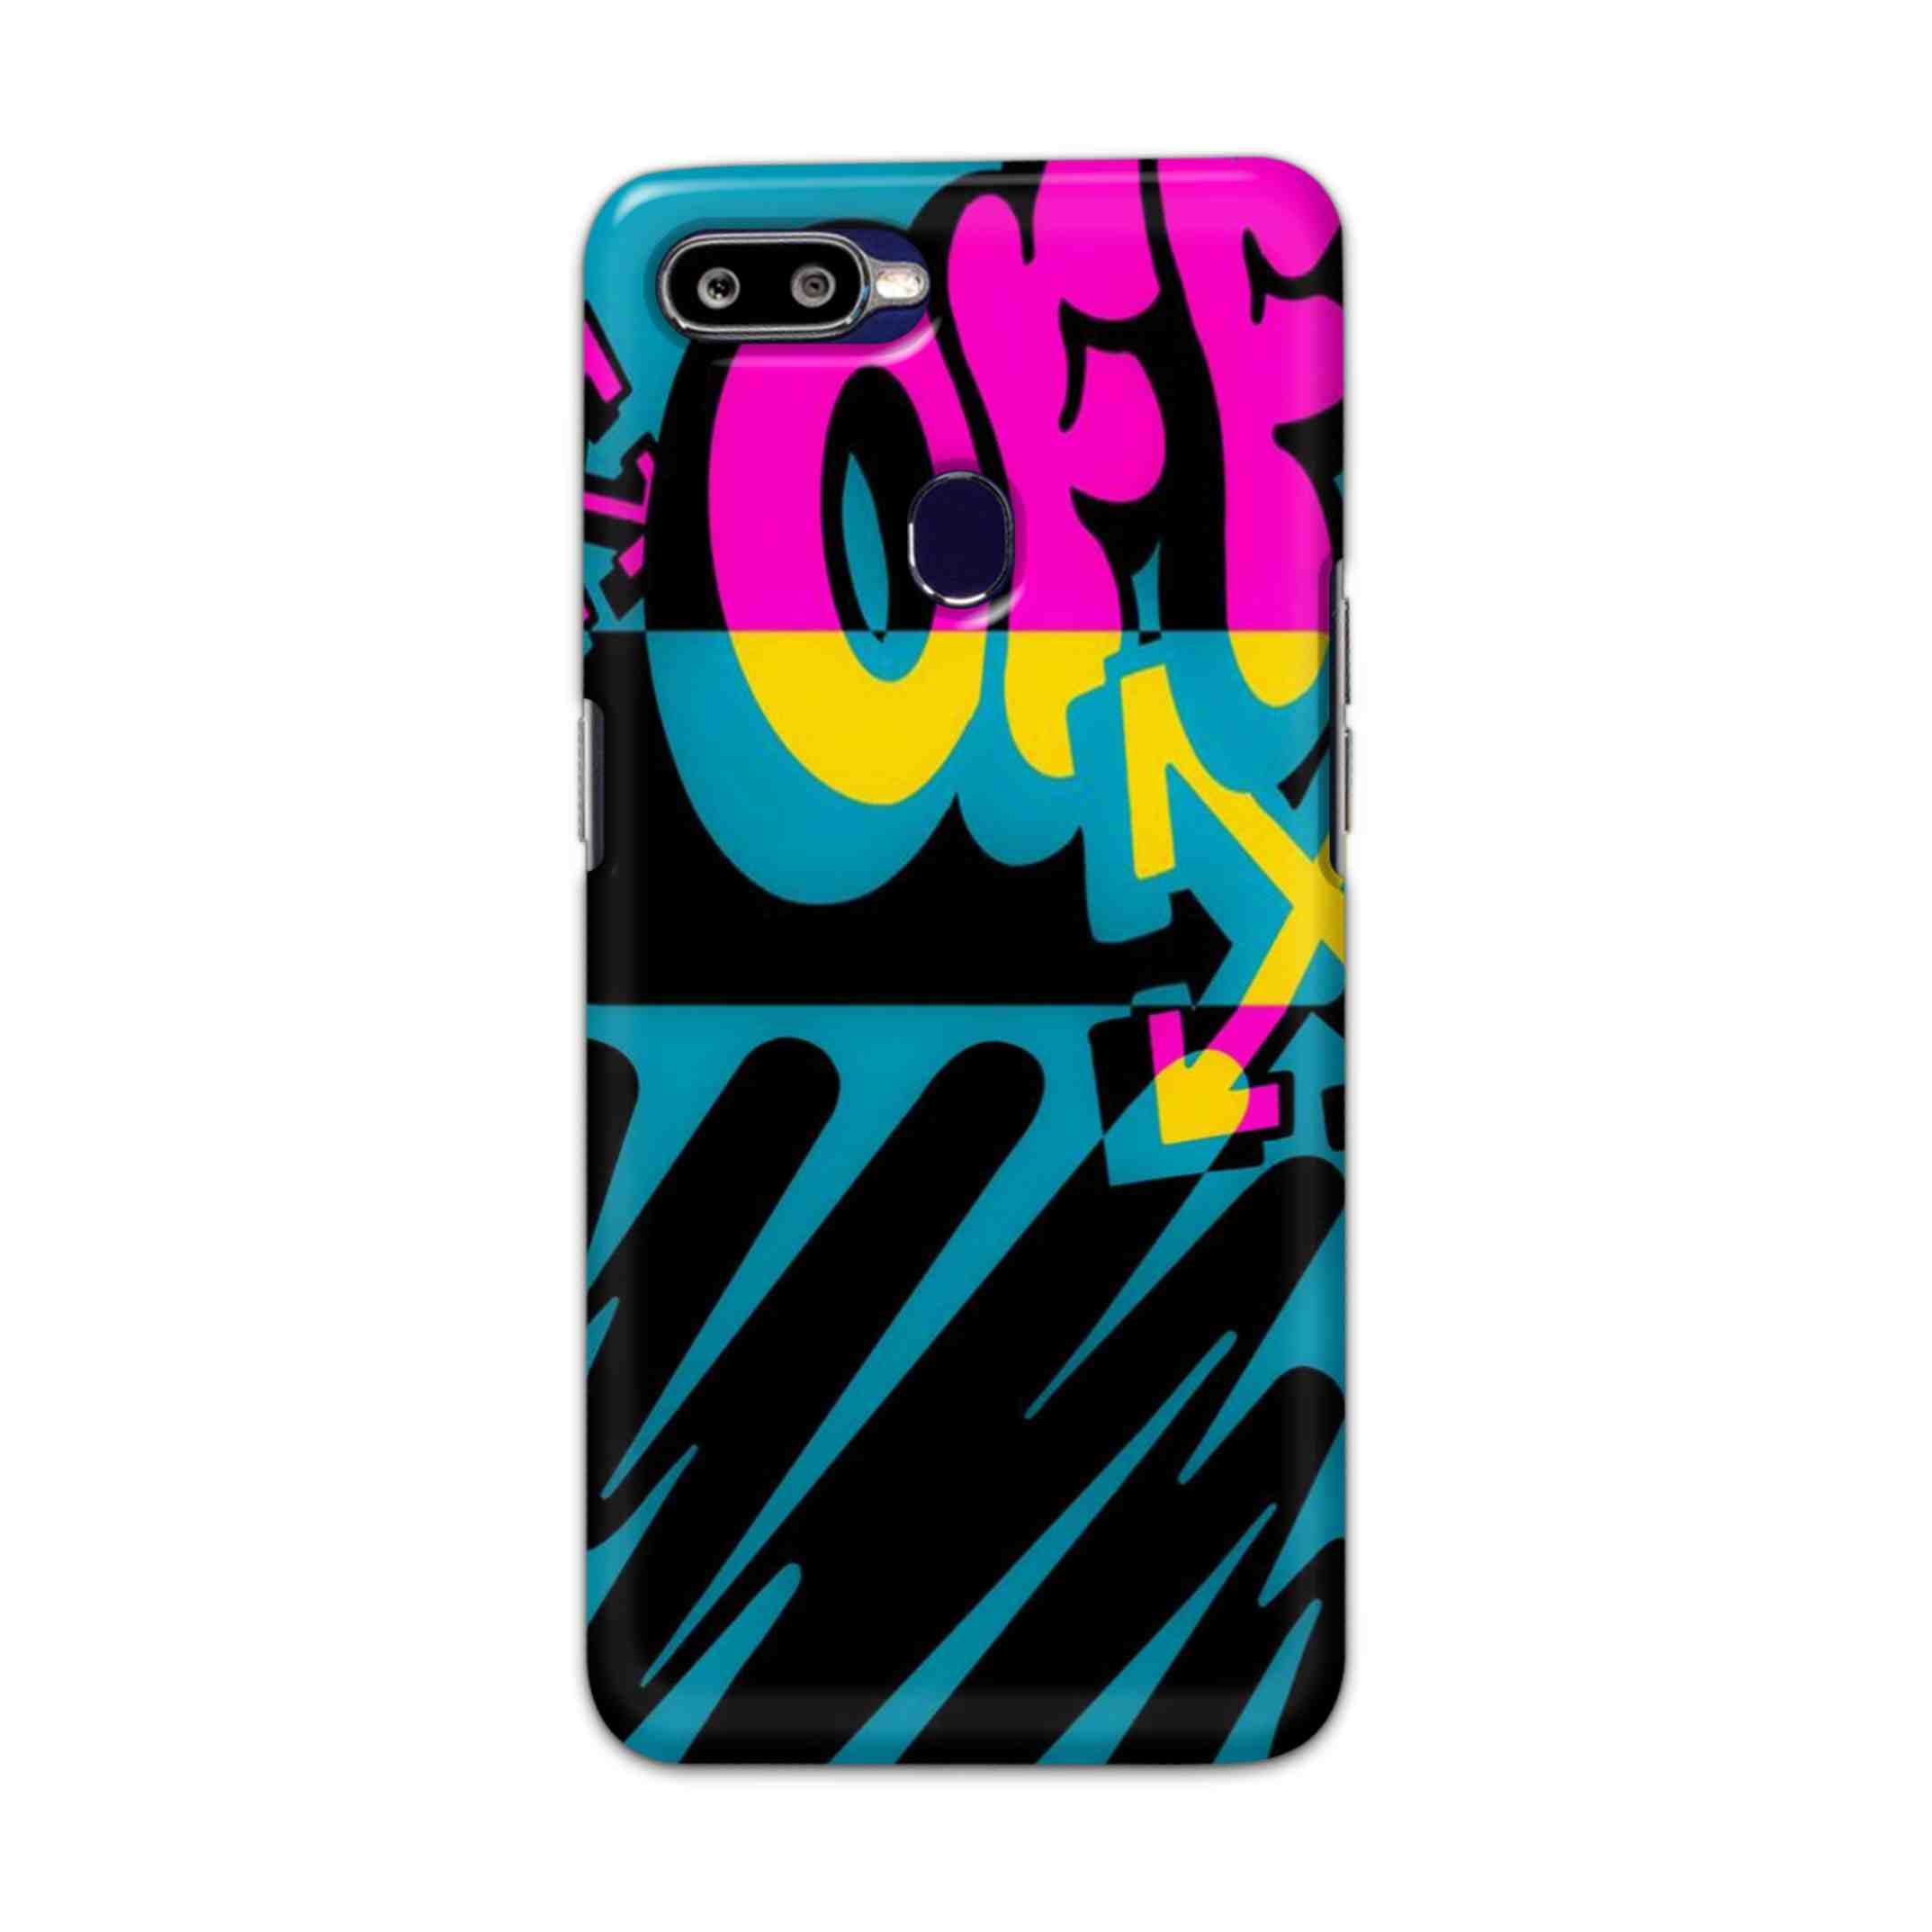 Buy Off Hard Back Mobile Phone Case/Cover For Oppo F9 / F9 Pro Online